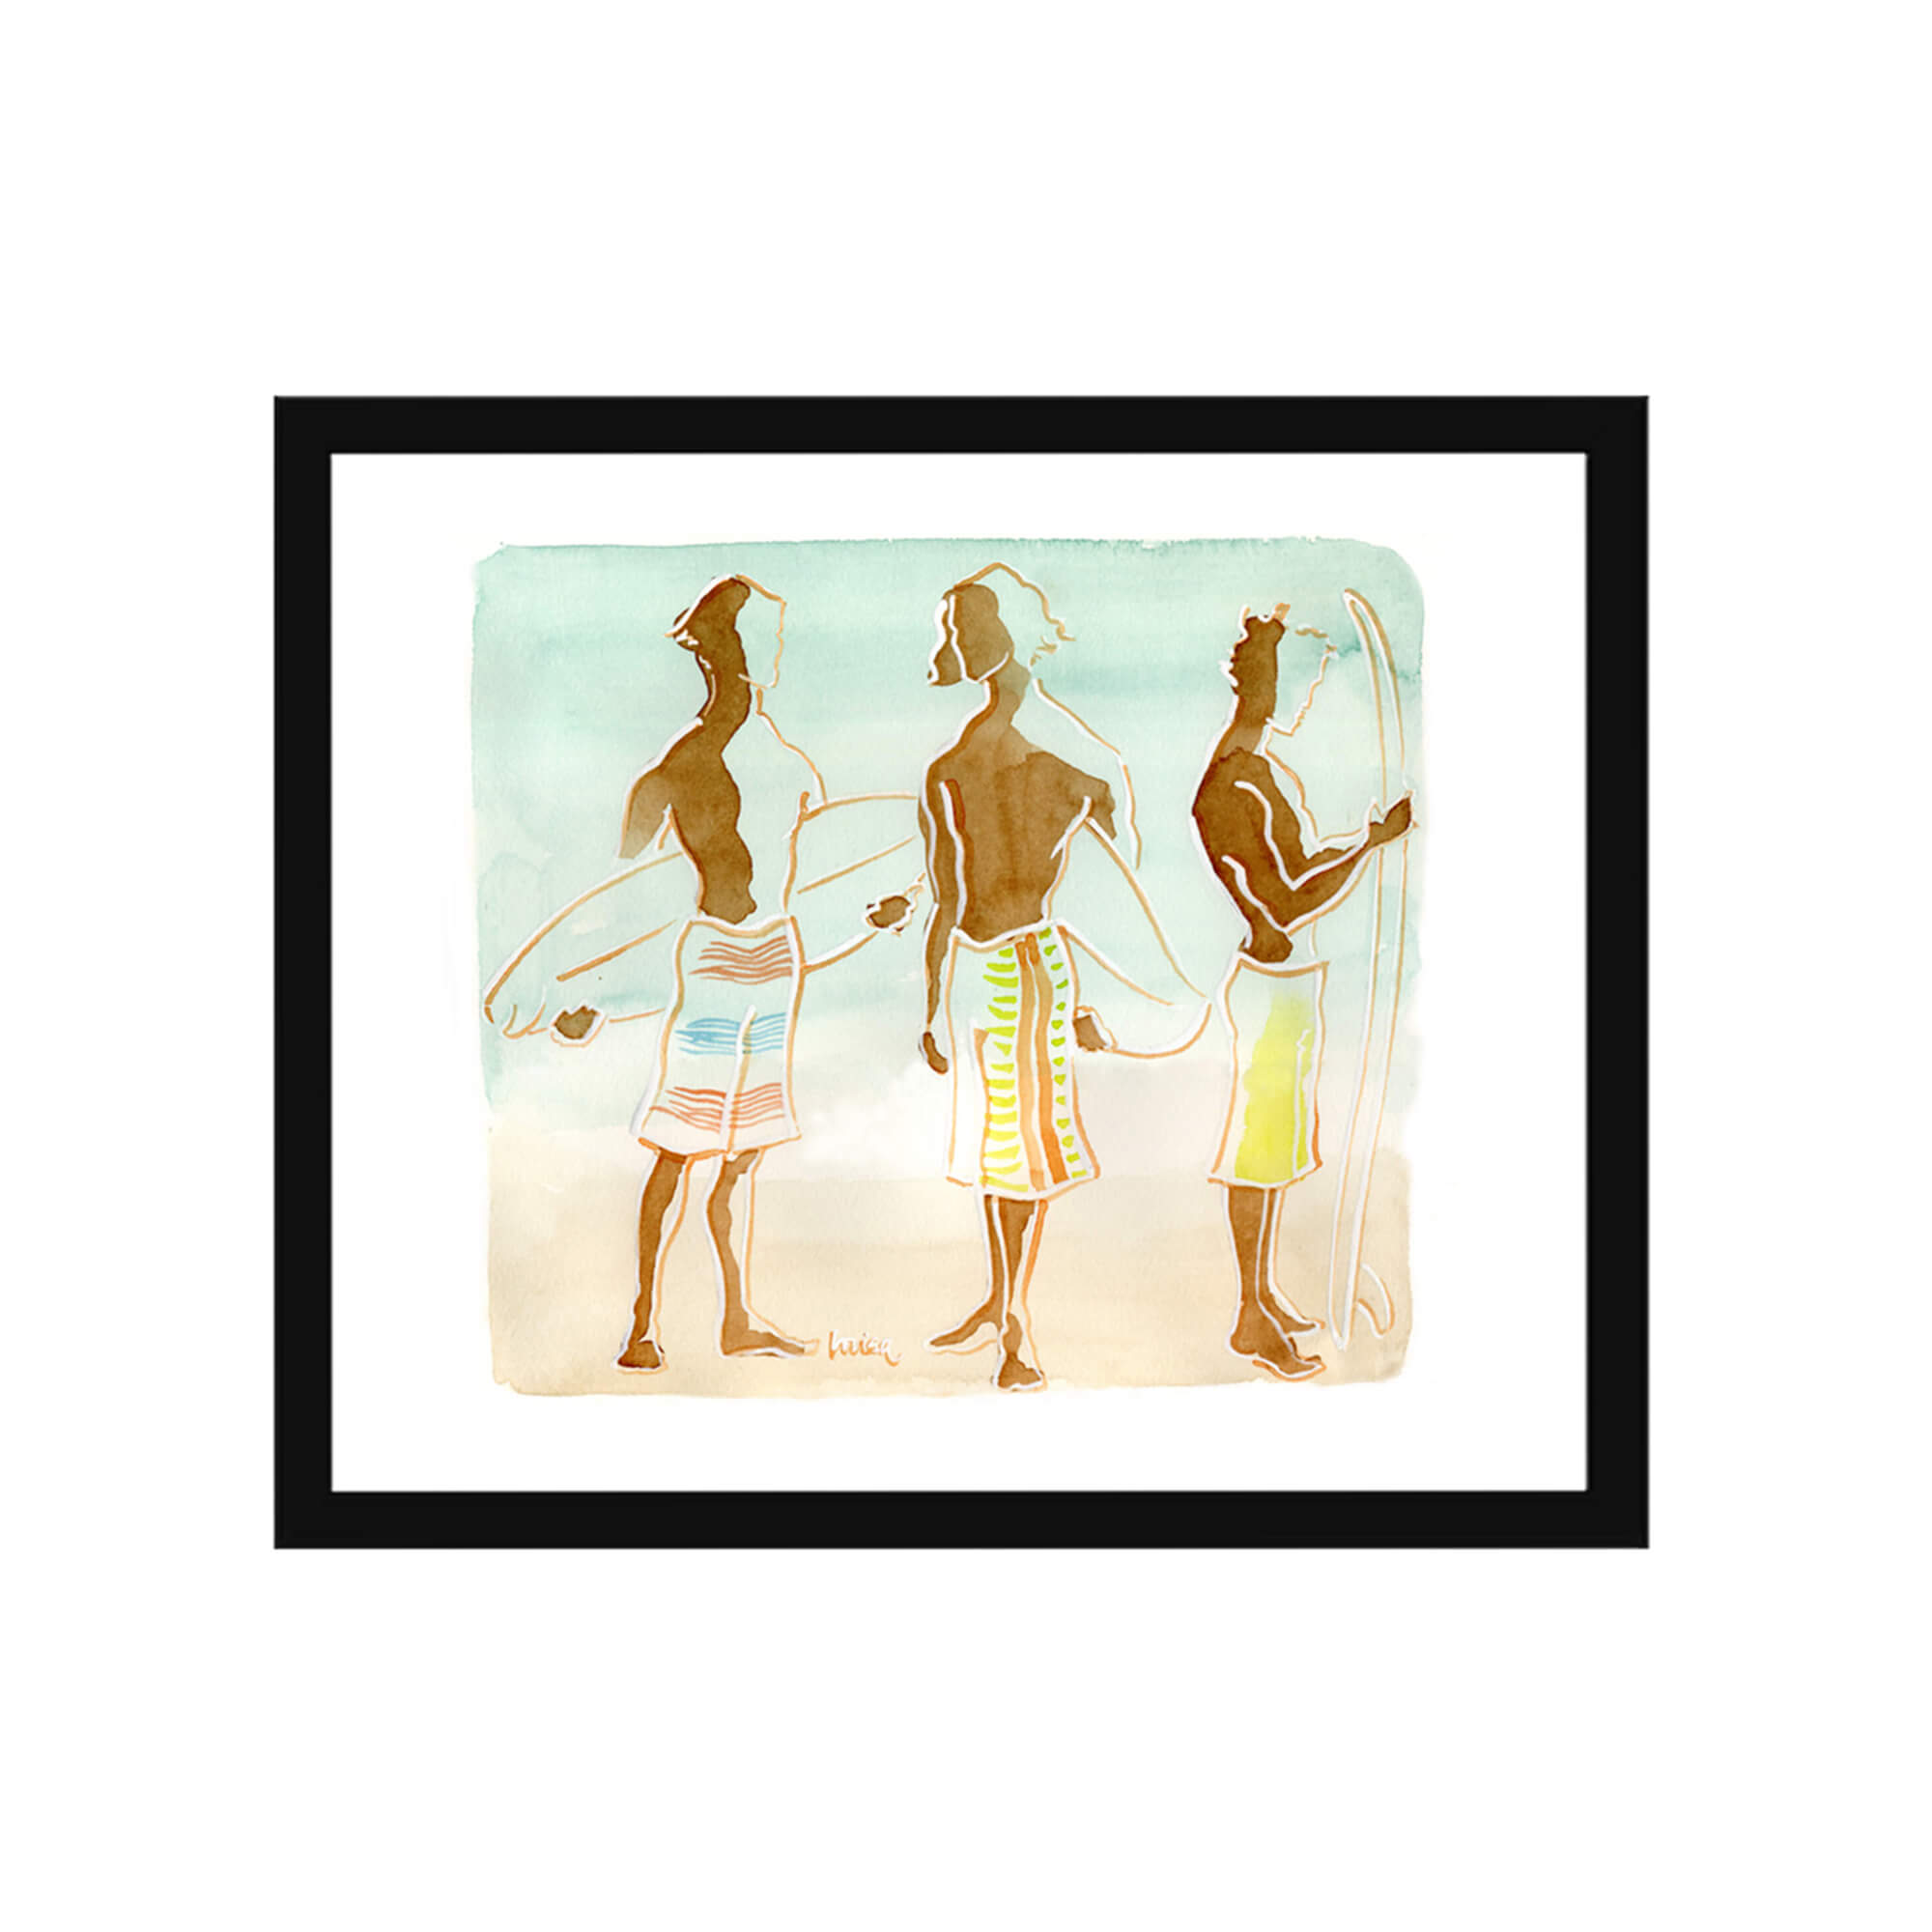 Framed paper giclée print of a watercolor artwork featuring three men surfers with surfboards by Hawaii artist Lovisa Oliv